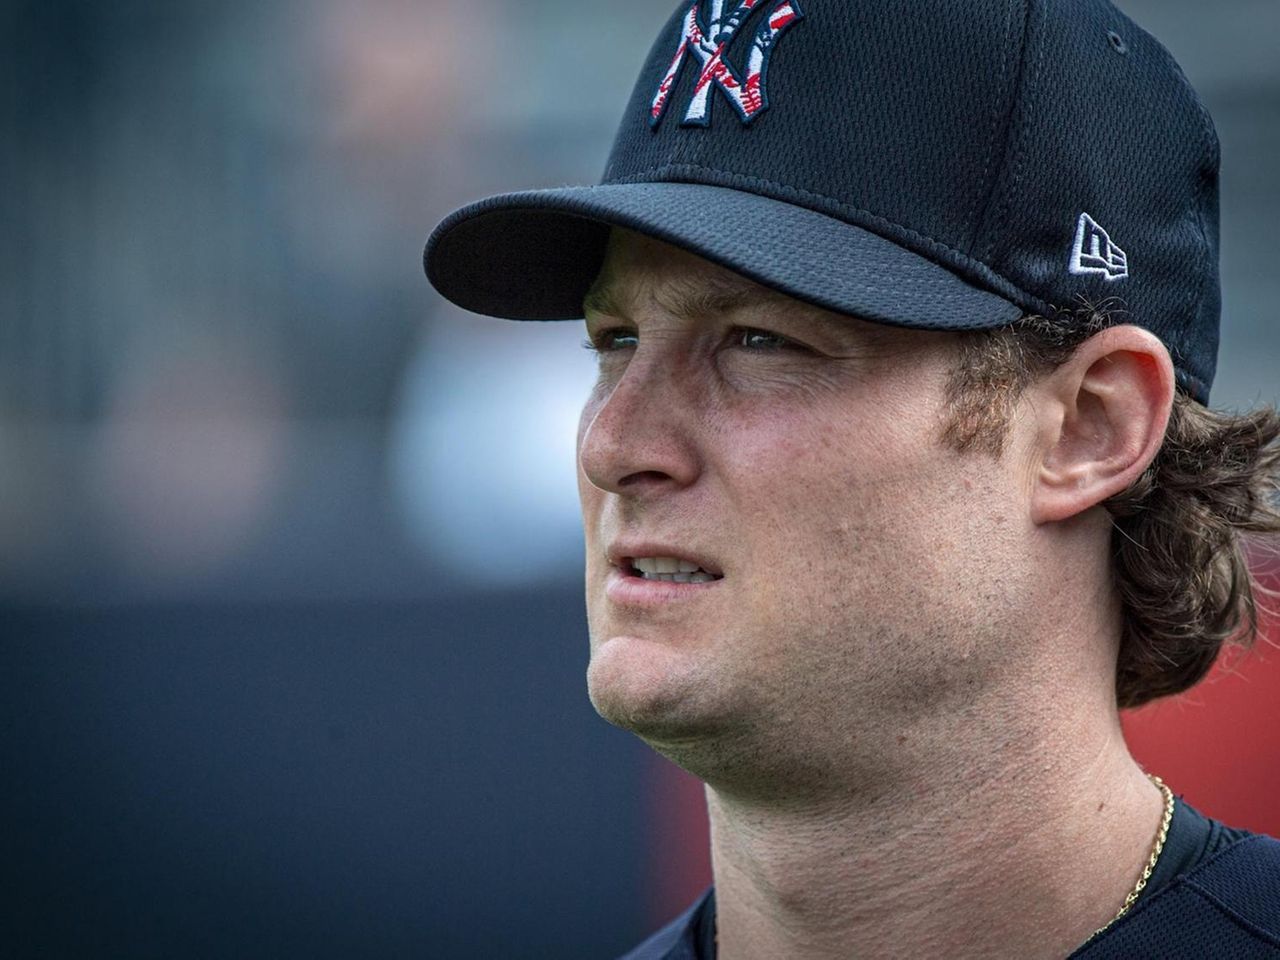 Baseball: Yankees pitcher Gerrit Cole forced to shave beard